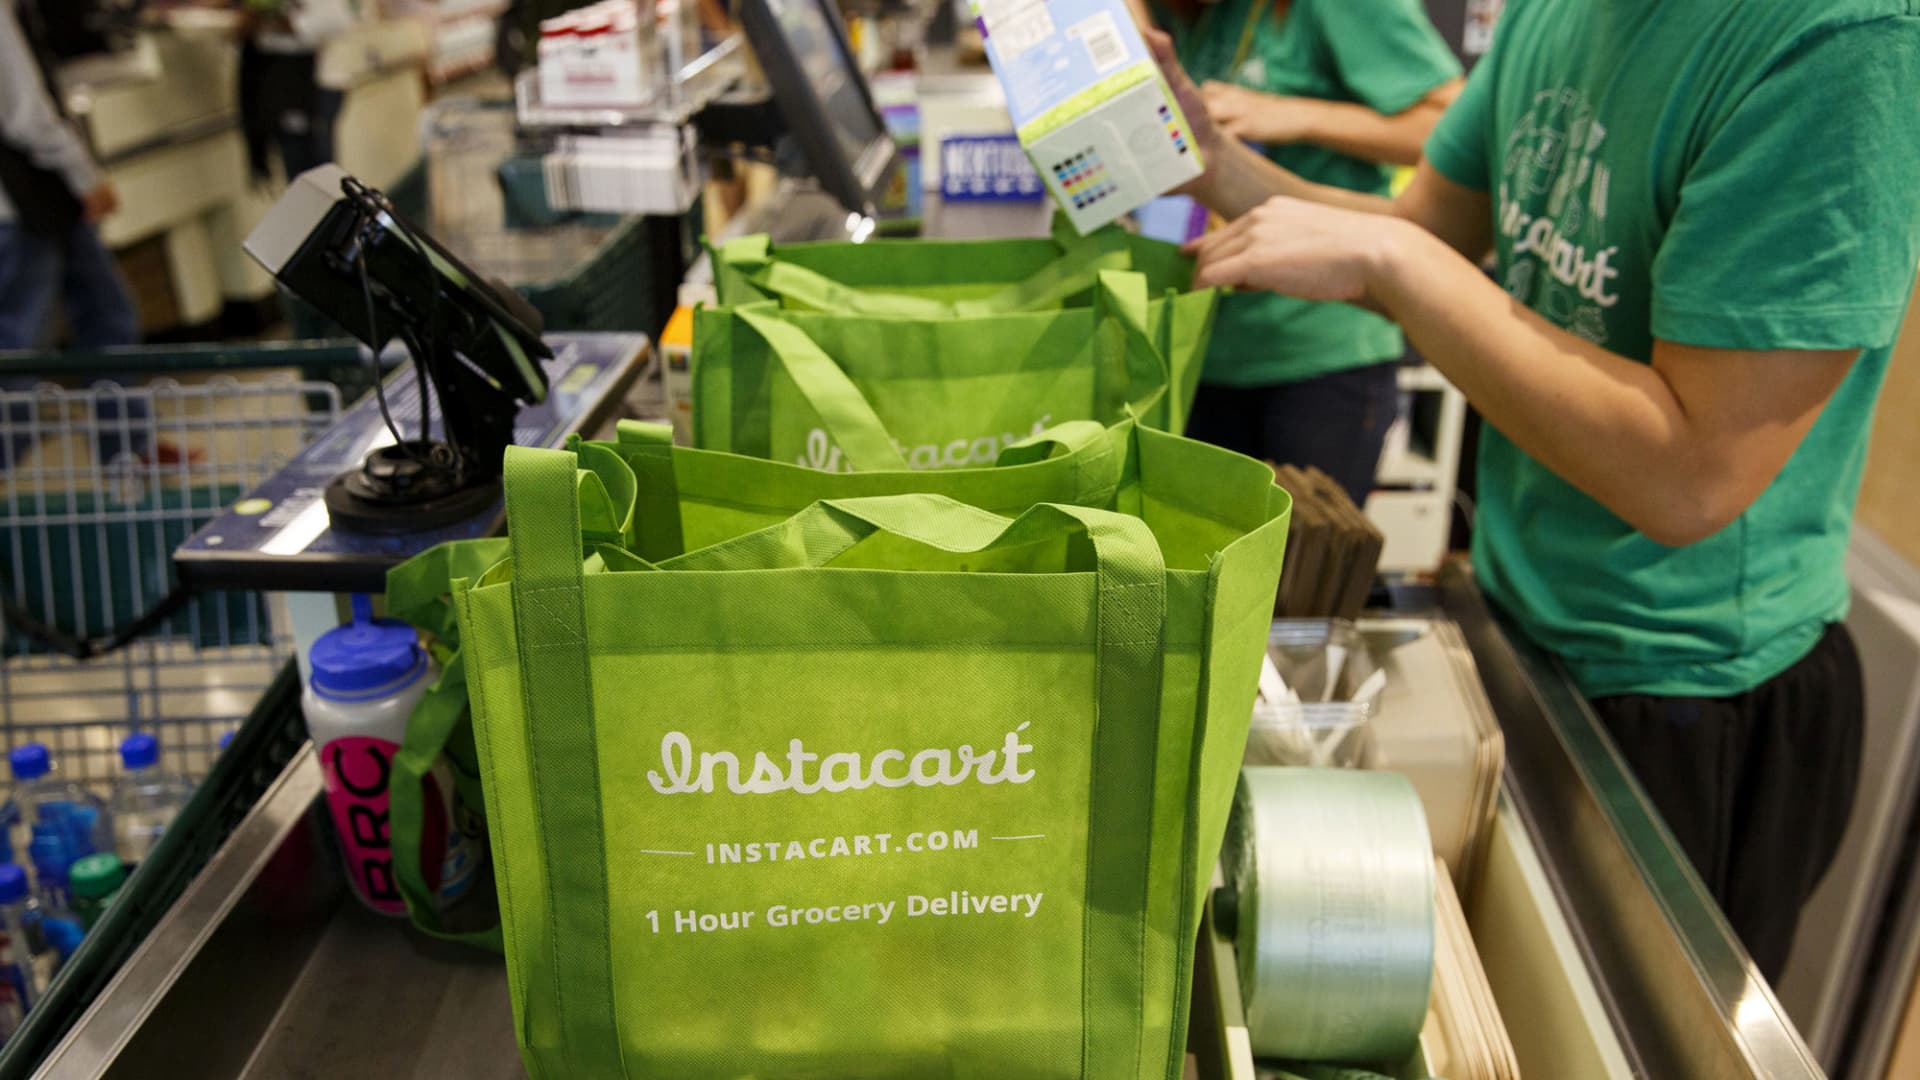 Instacart reportedly pulls IPO on volatile market conditions